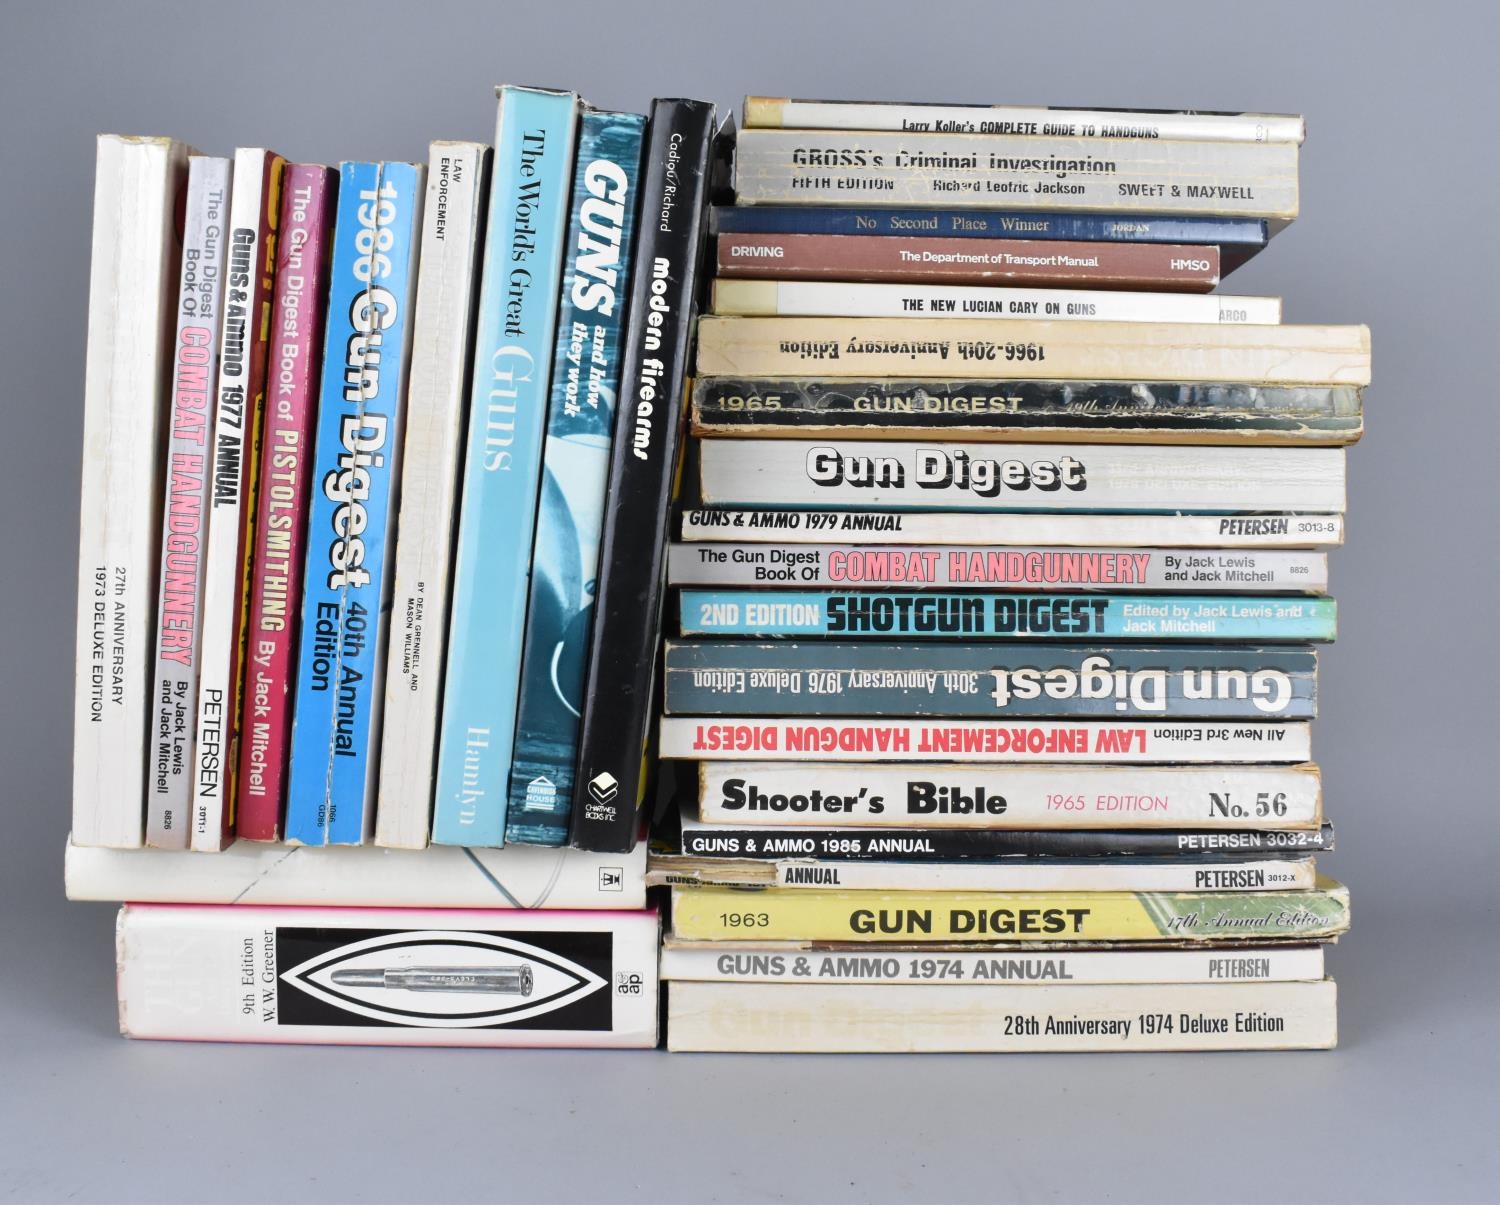 A Collection of Various Books and Pamphlets on a Topic of Guns, Gun Digest, Eley etc